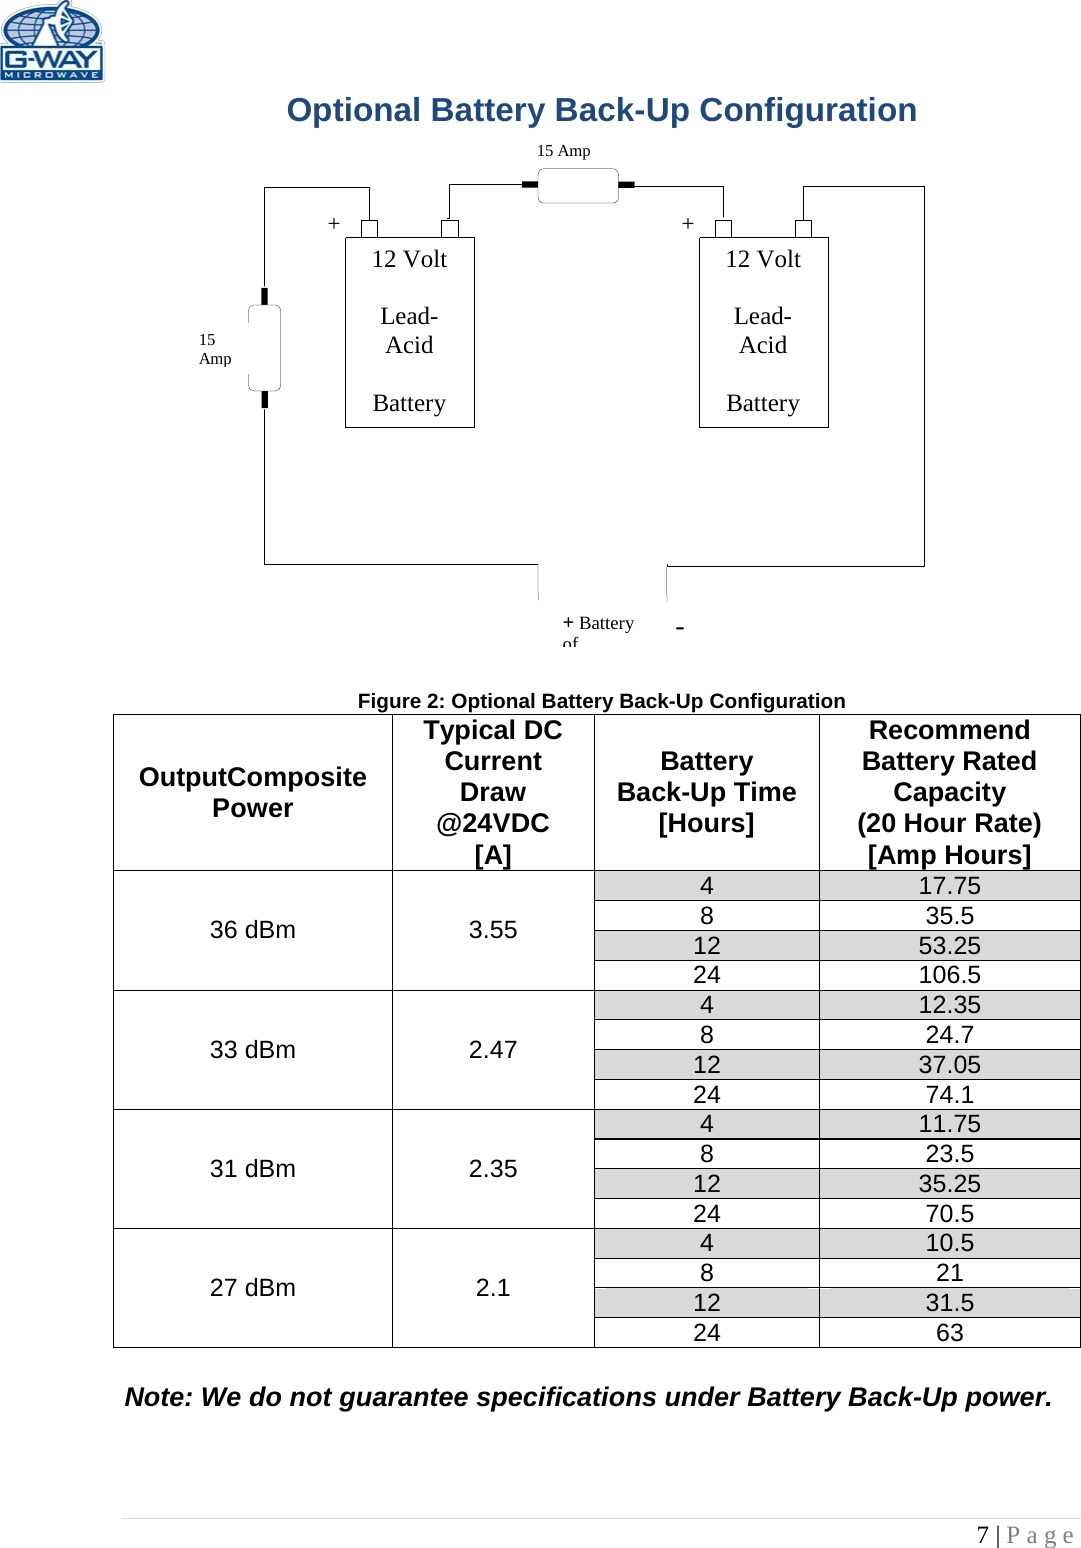   7 | Page  15 Amp  15 Amp       12 Volt  Lead-Acid  Battery  12 Volt  Lead-Acid  Battery  + + + Battery of   - Optional Battery Back-Up Configuration                  Figure 2: Optional Battery Back-Up Configuration OutputComposite Power Typical DC Current  Draw @24VDC [A] Battery Back-Up Time [Hours] Recommend Battery Rated Capacity (20 Hour Rate) [Amp Hours] 36 dBm 3.55 4 17.75 8 35.5 12 53.25 24 106.5 33 dBm 2.47 4 12.35 8 24.7 12 37.05 24 74.1 31 dBm  2.35 4 11.75 8 23.5 12 35.25 24 70.5 27 dBm 2.1 4 10.5 8 21 12 31.5 24 63  Note: We do not guarantee specifications under Battery Back-Up power.  